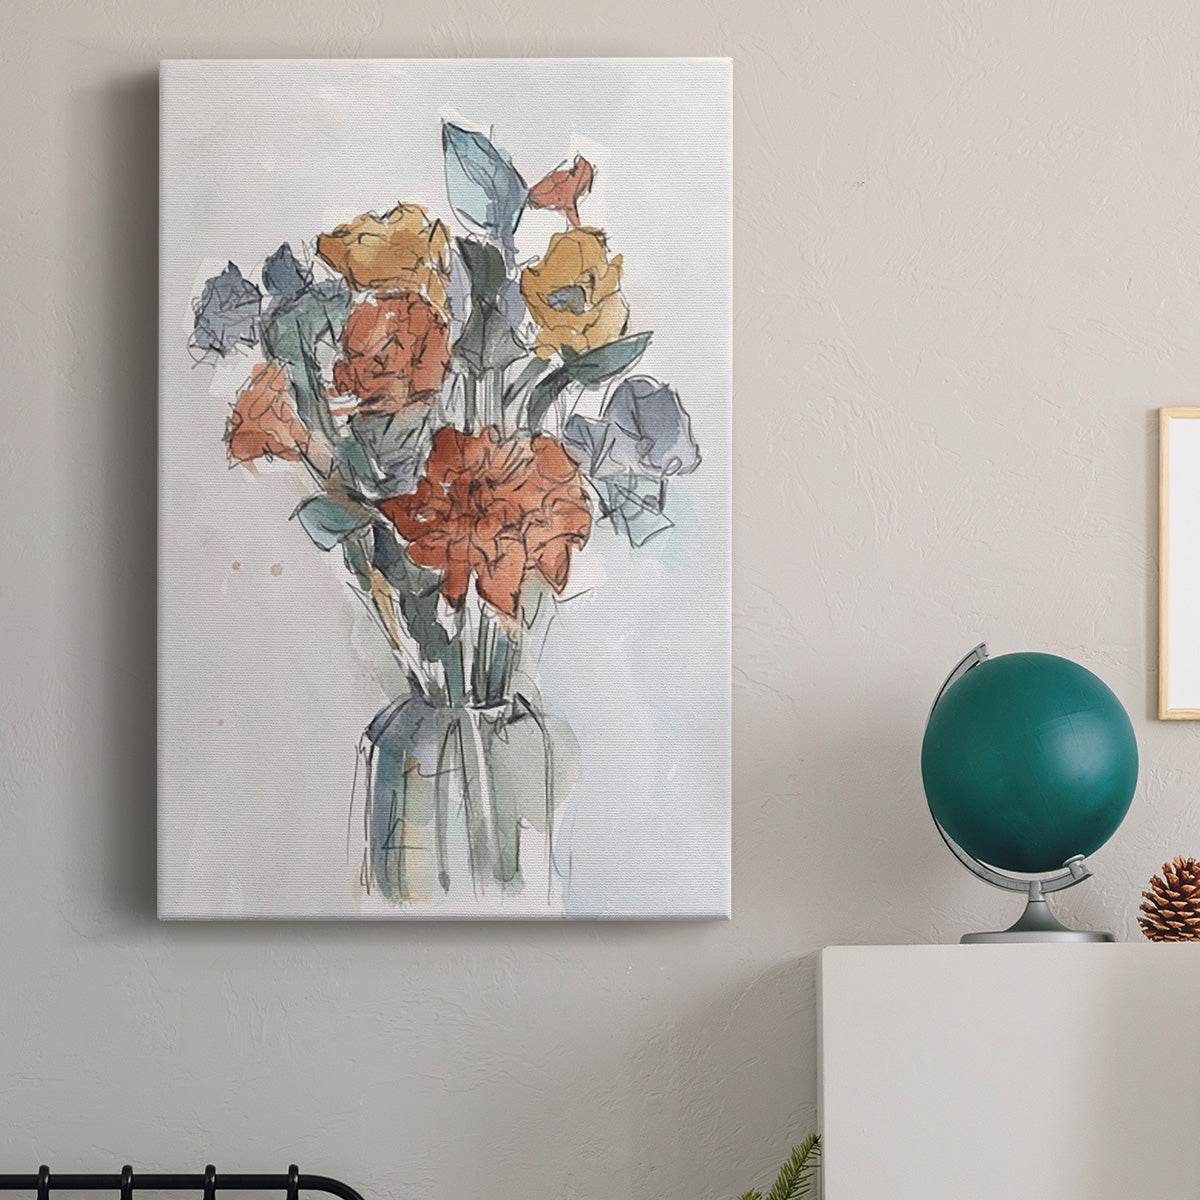 Watercolor Floral Arrangement I Premium Gallery Wrapped Canvas - Ready to Hang